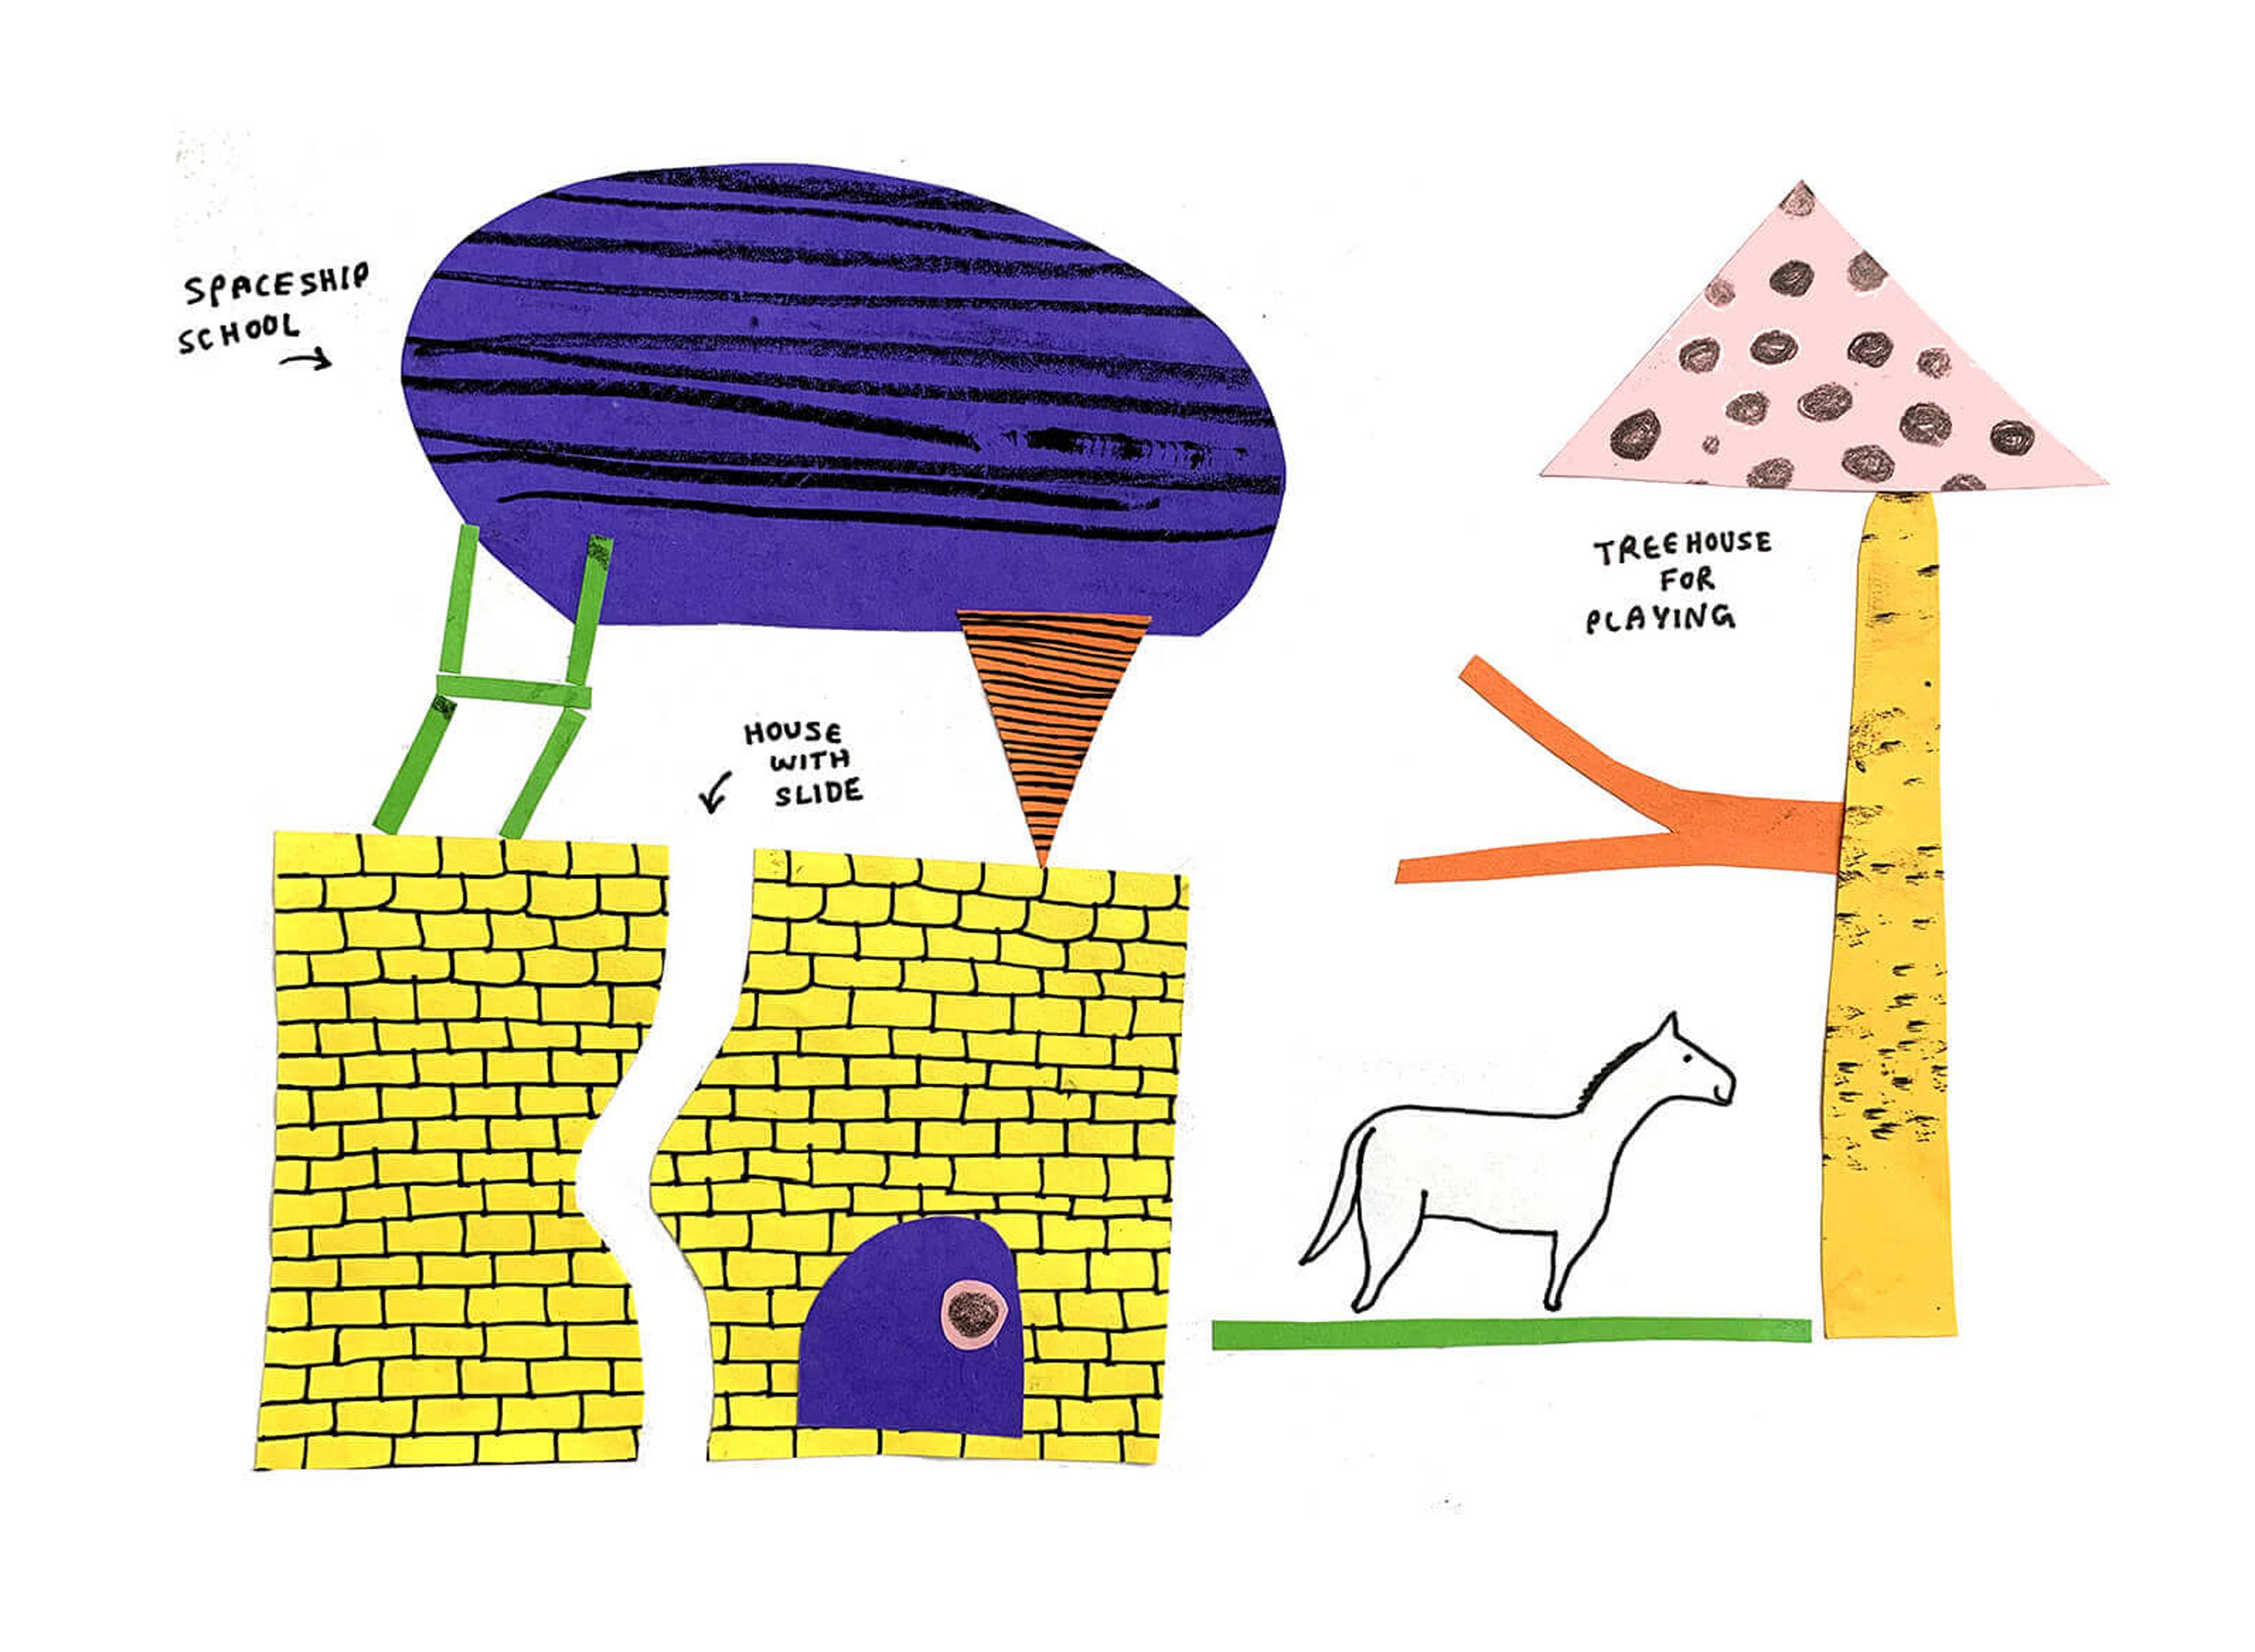 Collage showing a spaceship on top of a house with a slide, with a horse and a treehouse